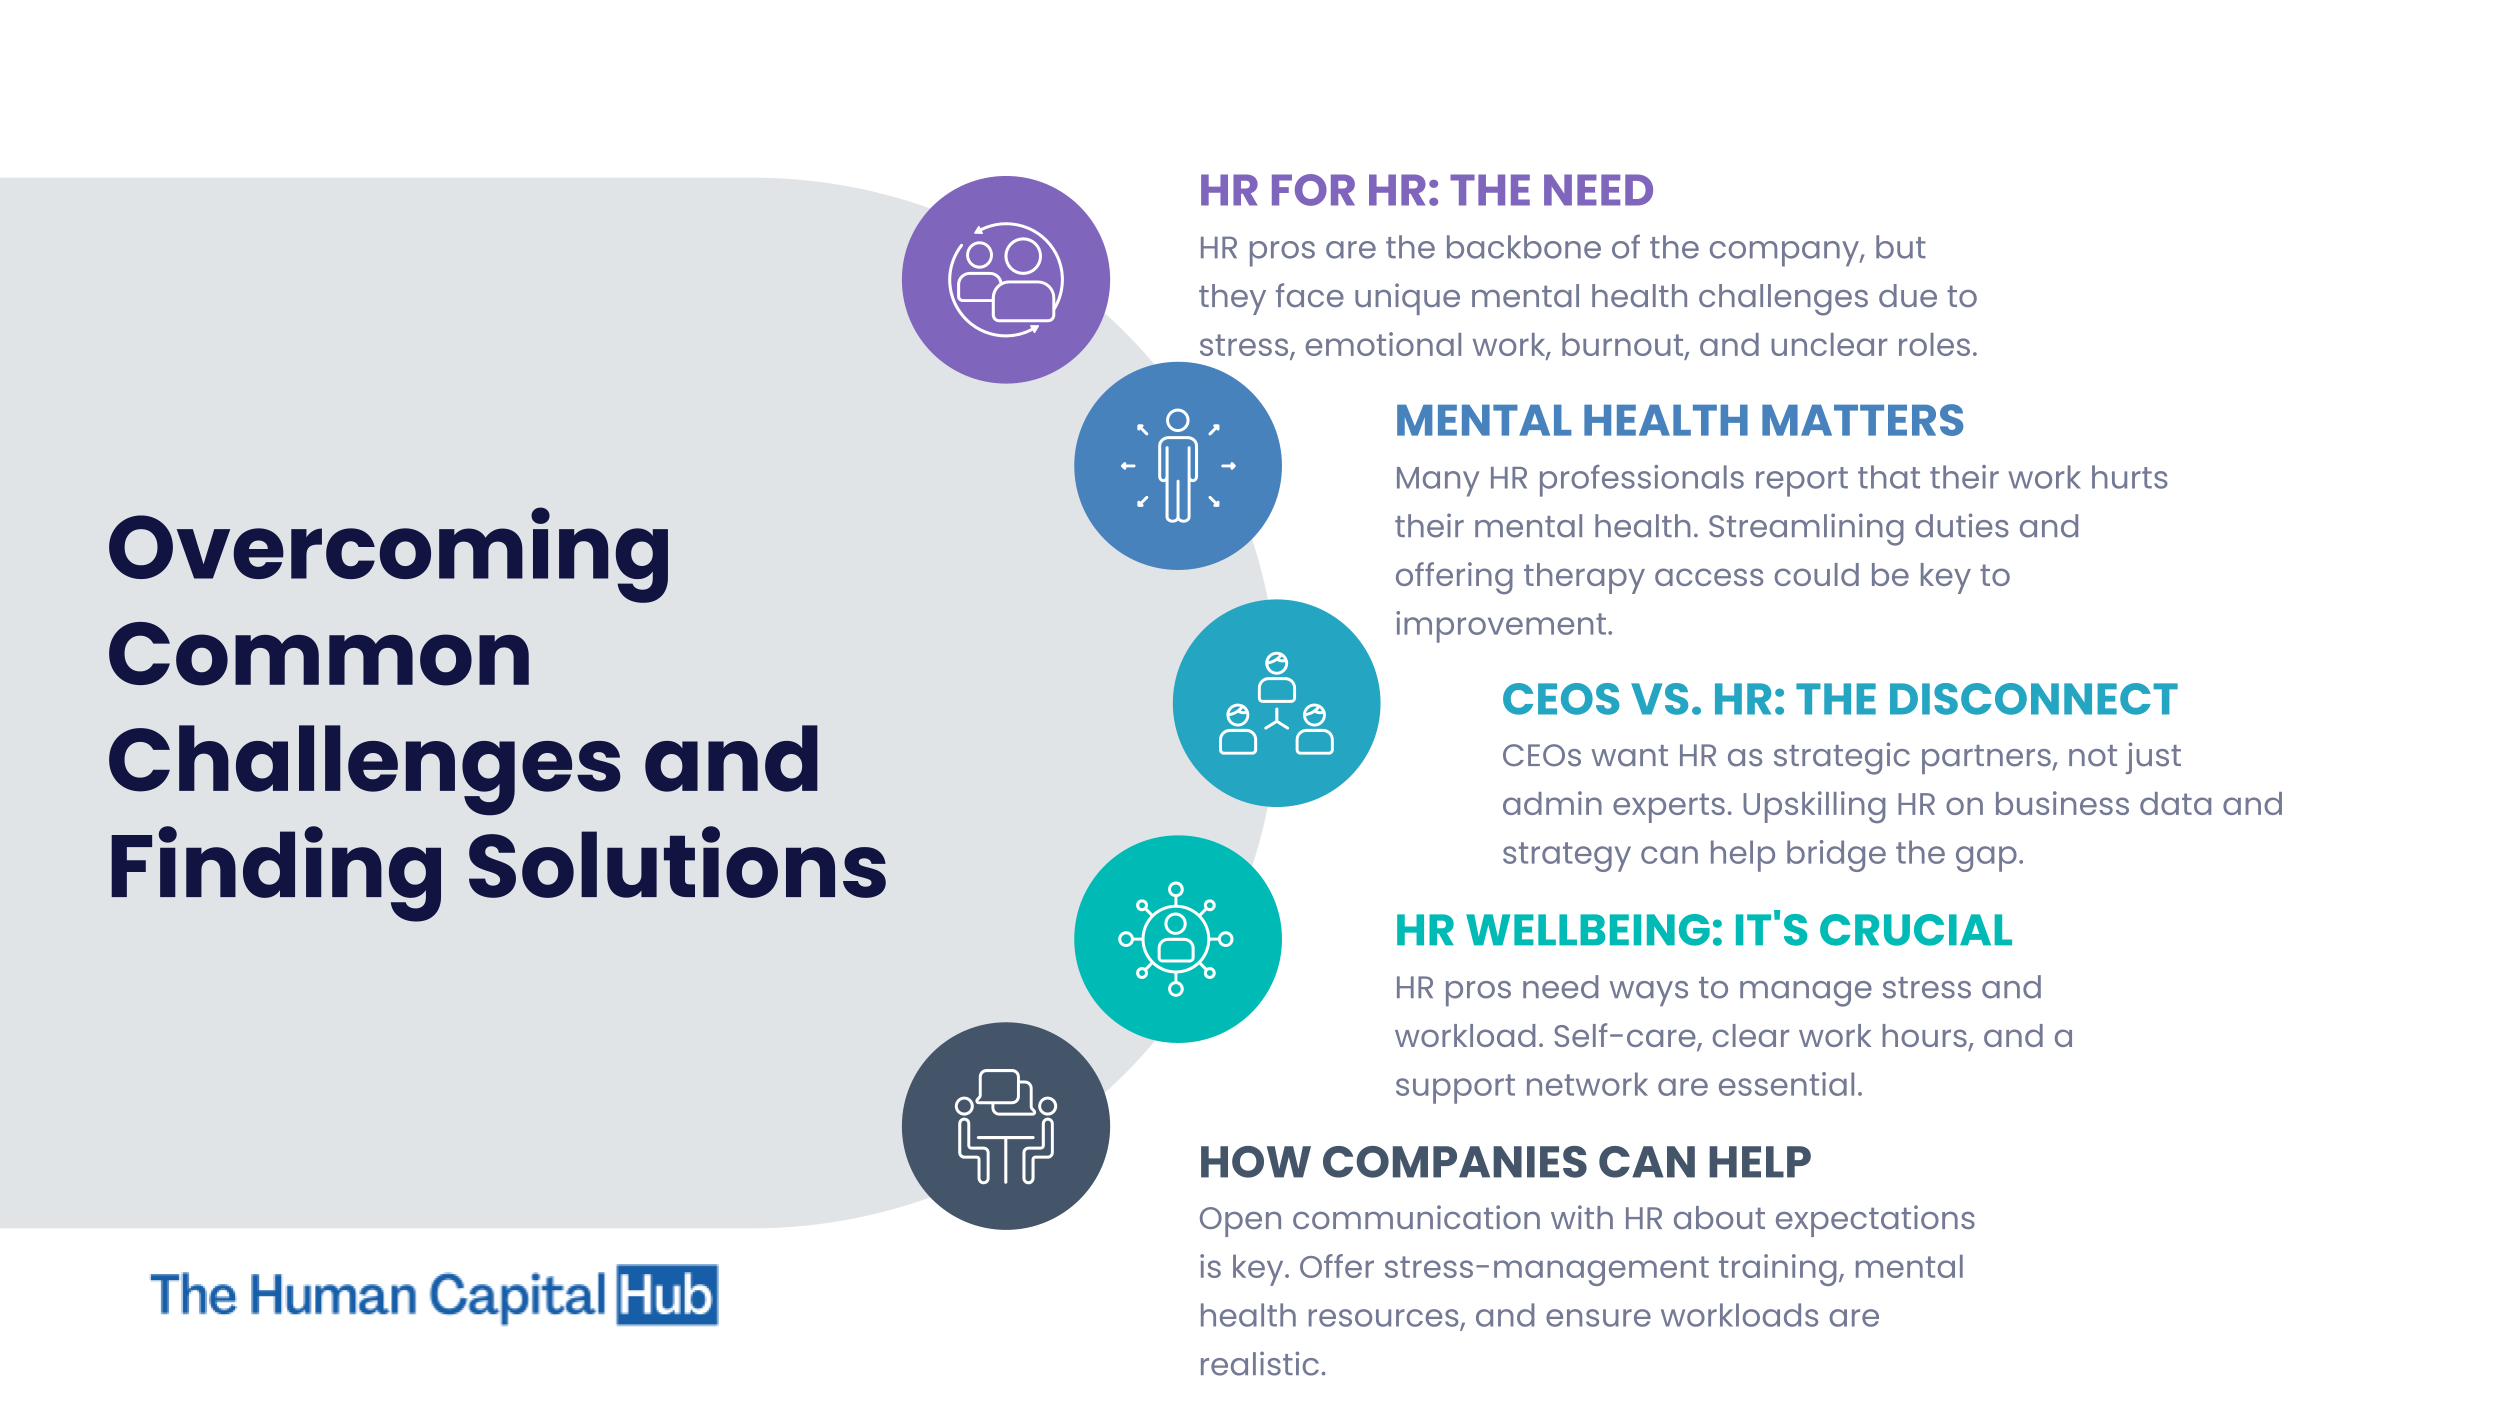 HR for HR: Overcoming Common Challenges and Finding Solutions